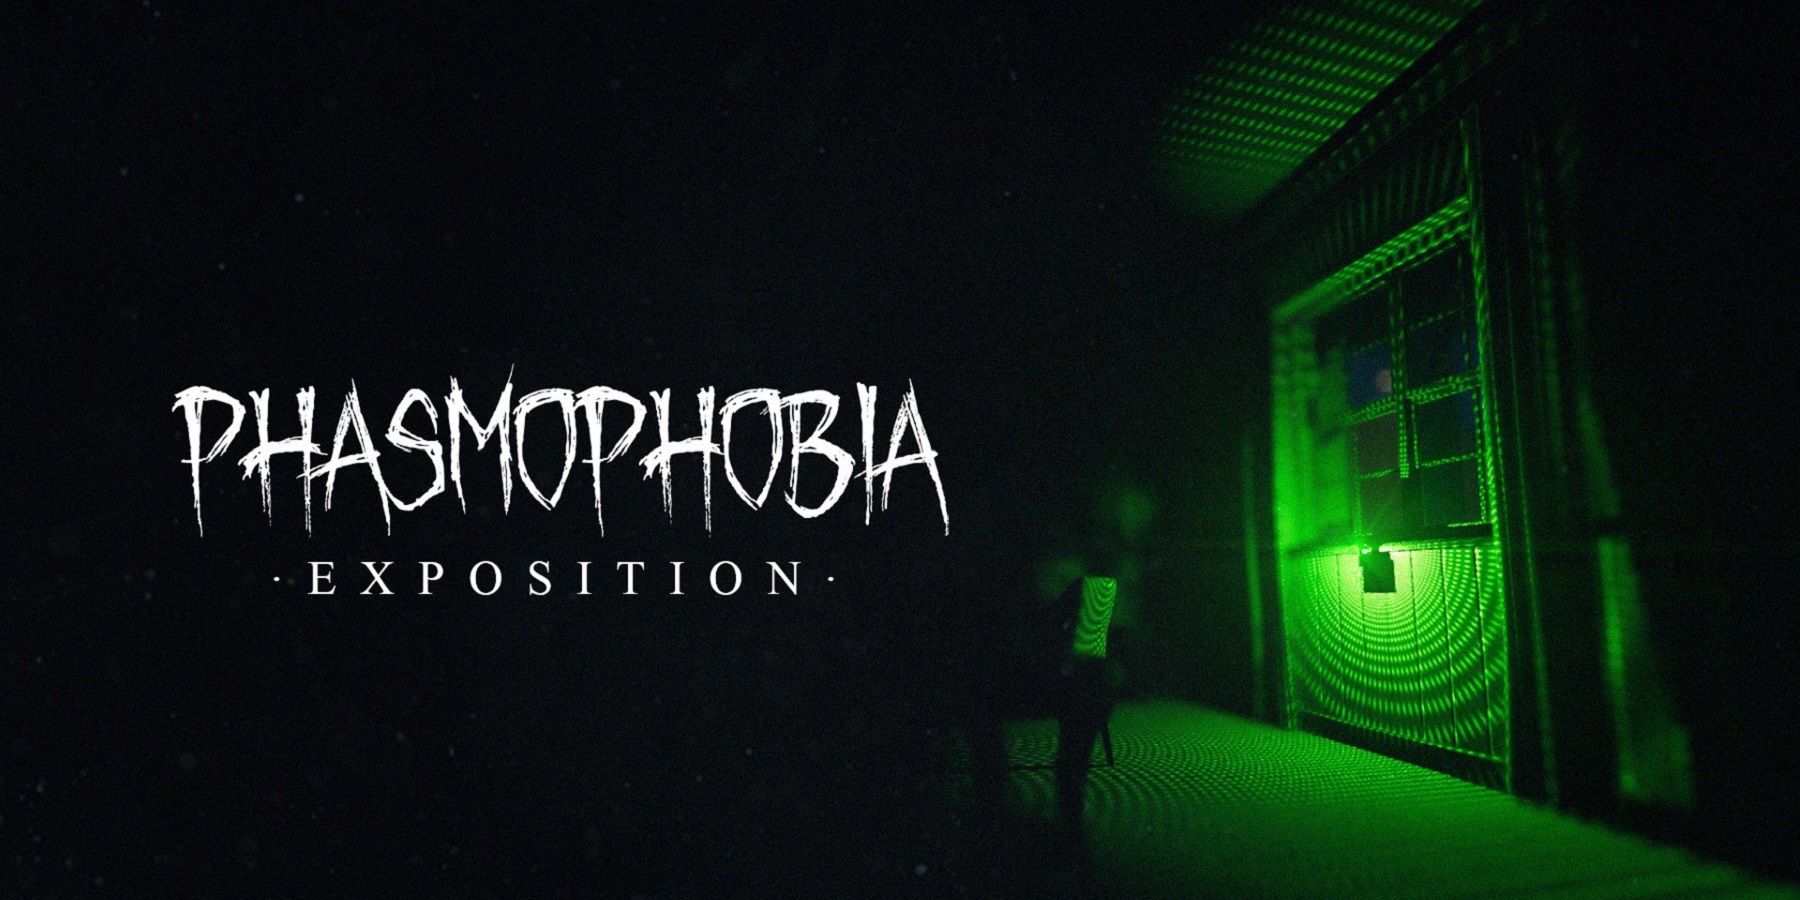 Phasmophobia "Exposition" Update Adds New Ghosts, New Equipment, And